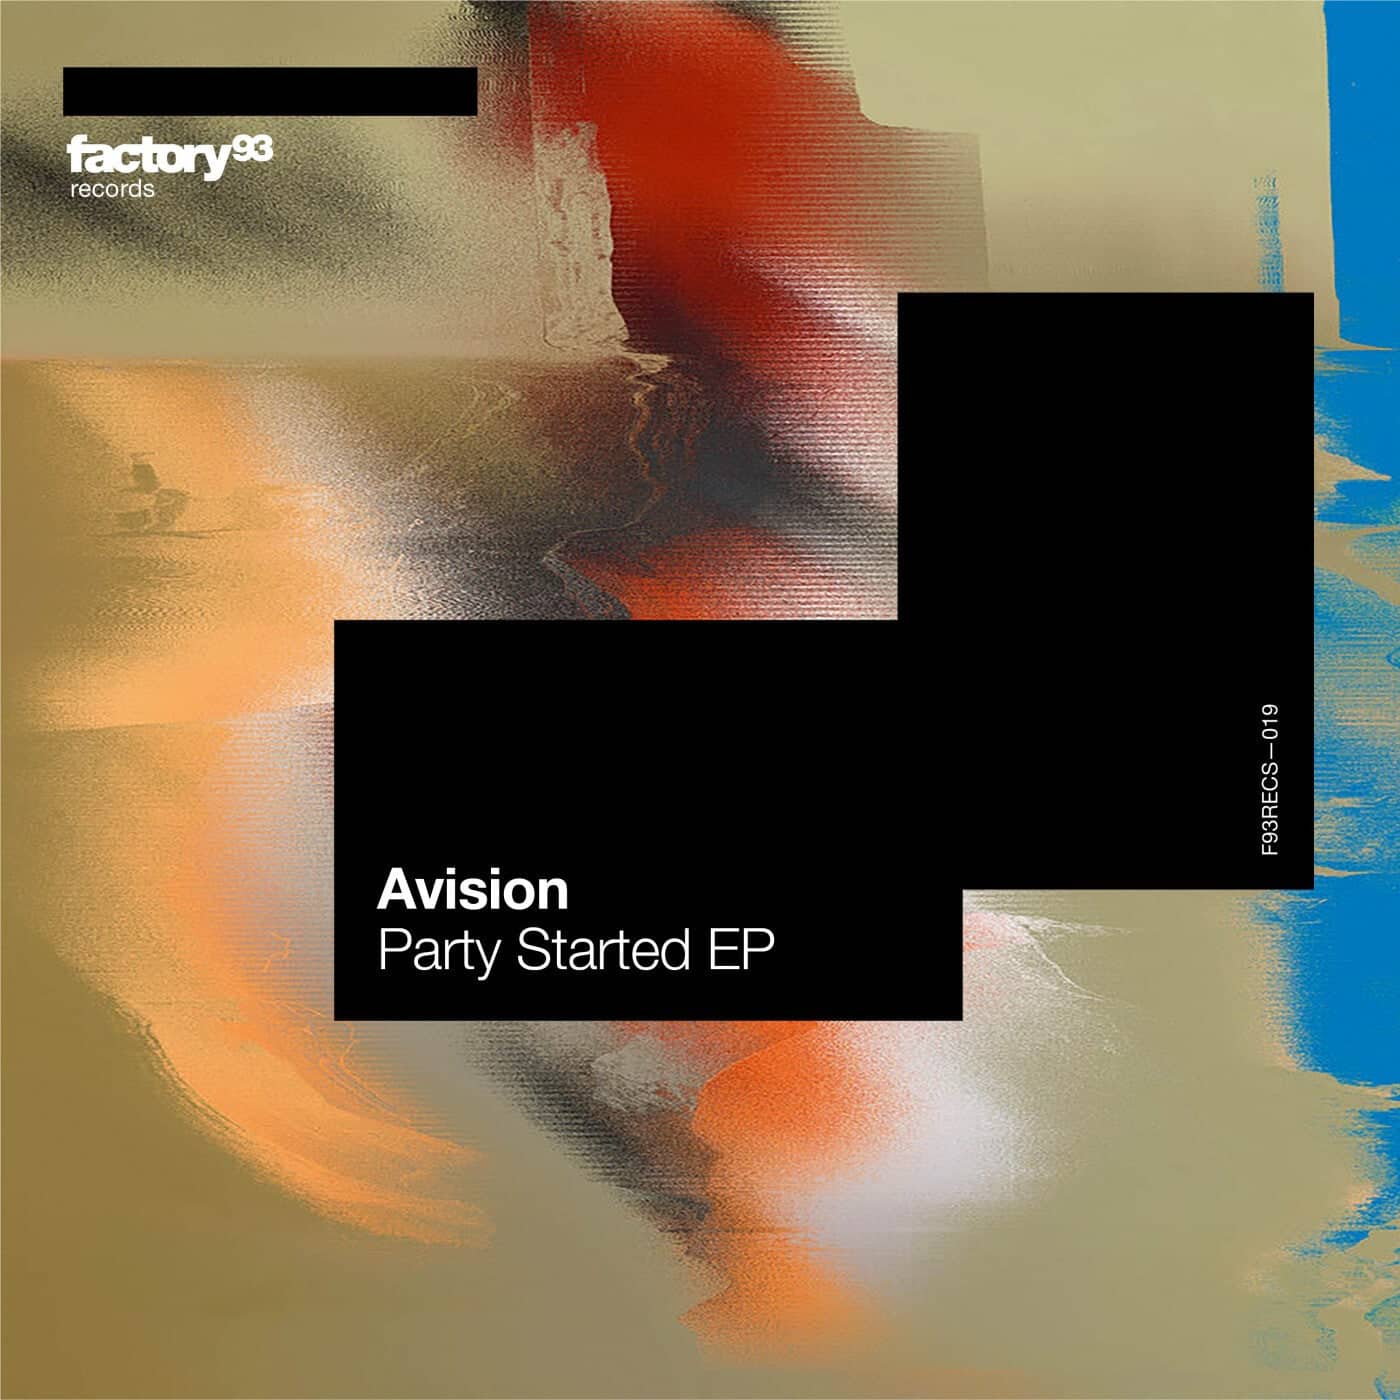 Download Strafe, Avision - Party Started EP on Electrobuzz